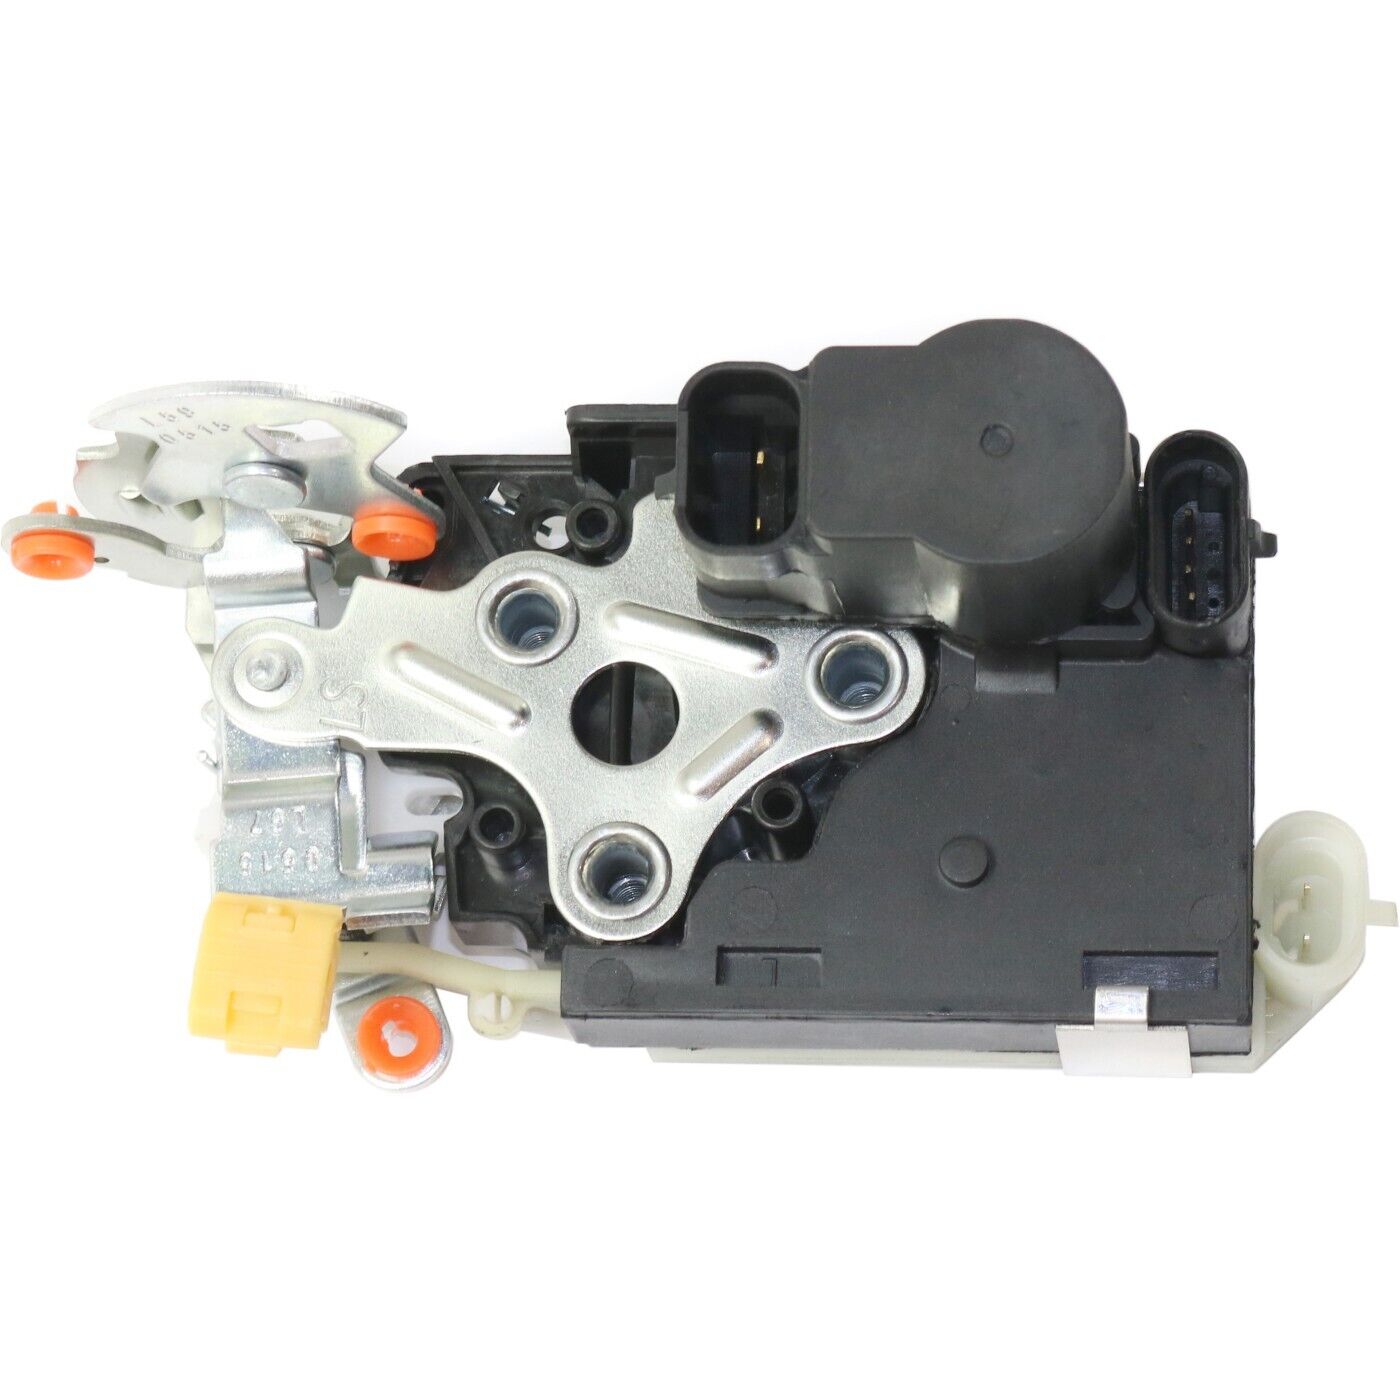 Door Lock Actuator For 2002-2006 Cadillac Escalade Lacth and Actuator Assembly